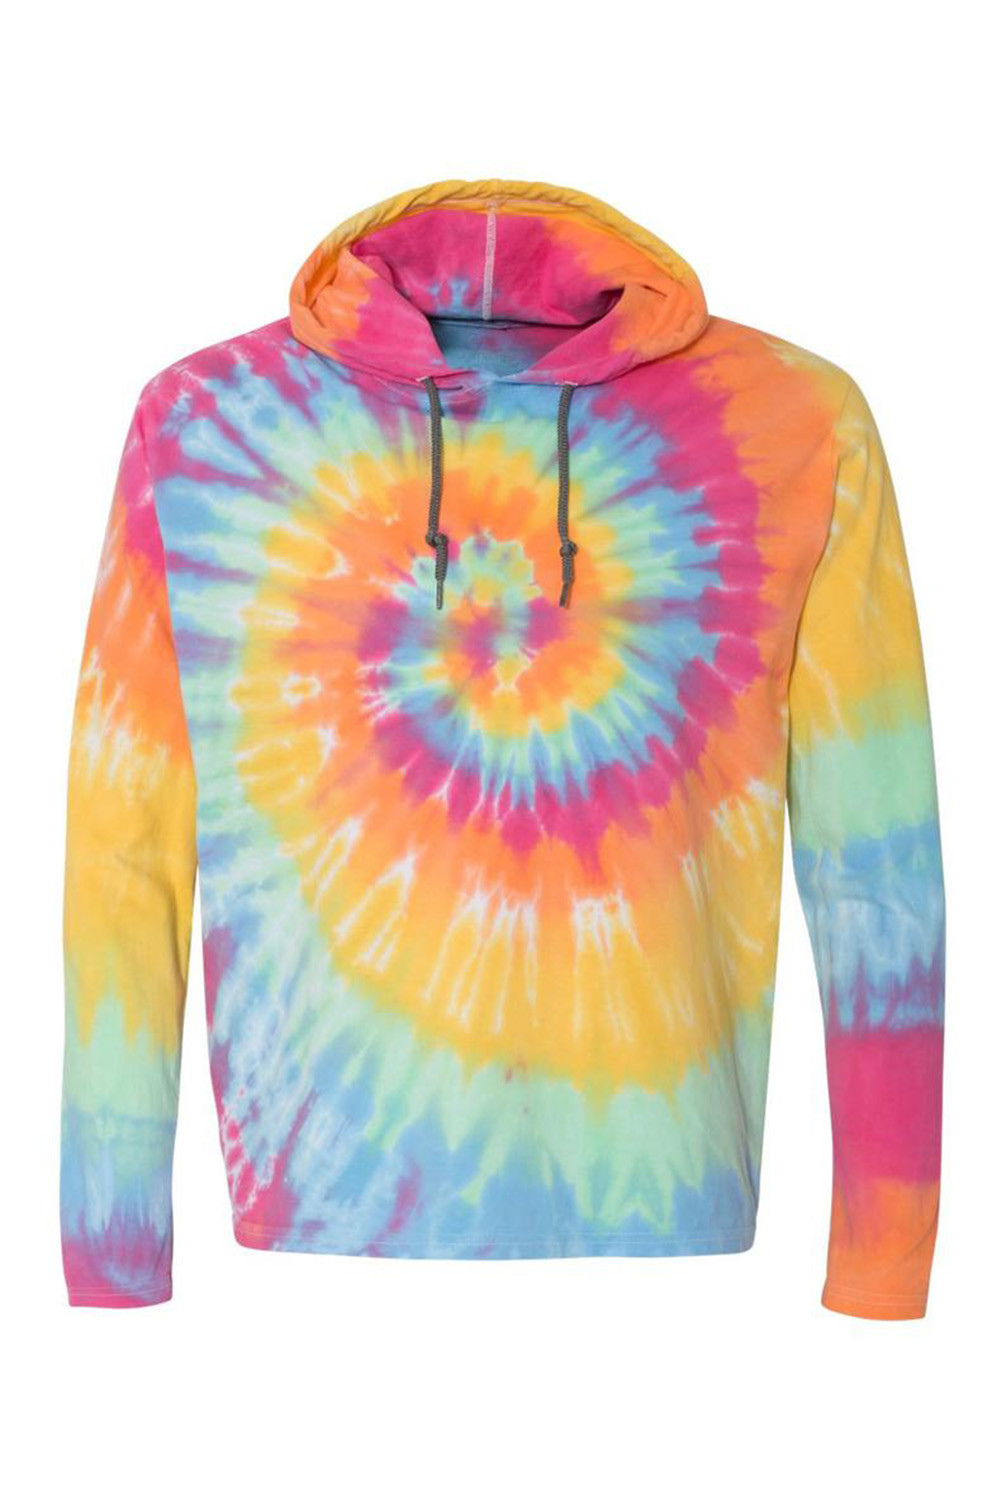 Wholesale Push it production, Cheap Yellow Tie-dye Casual Hoodie Online